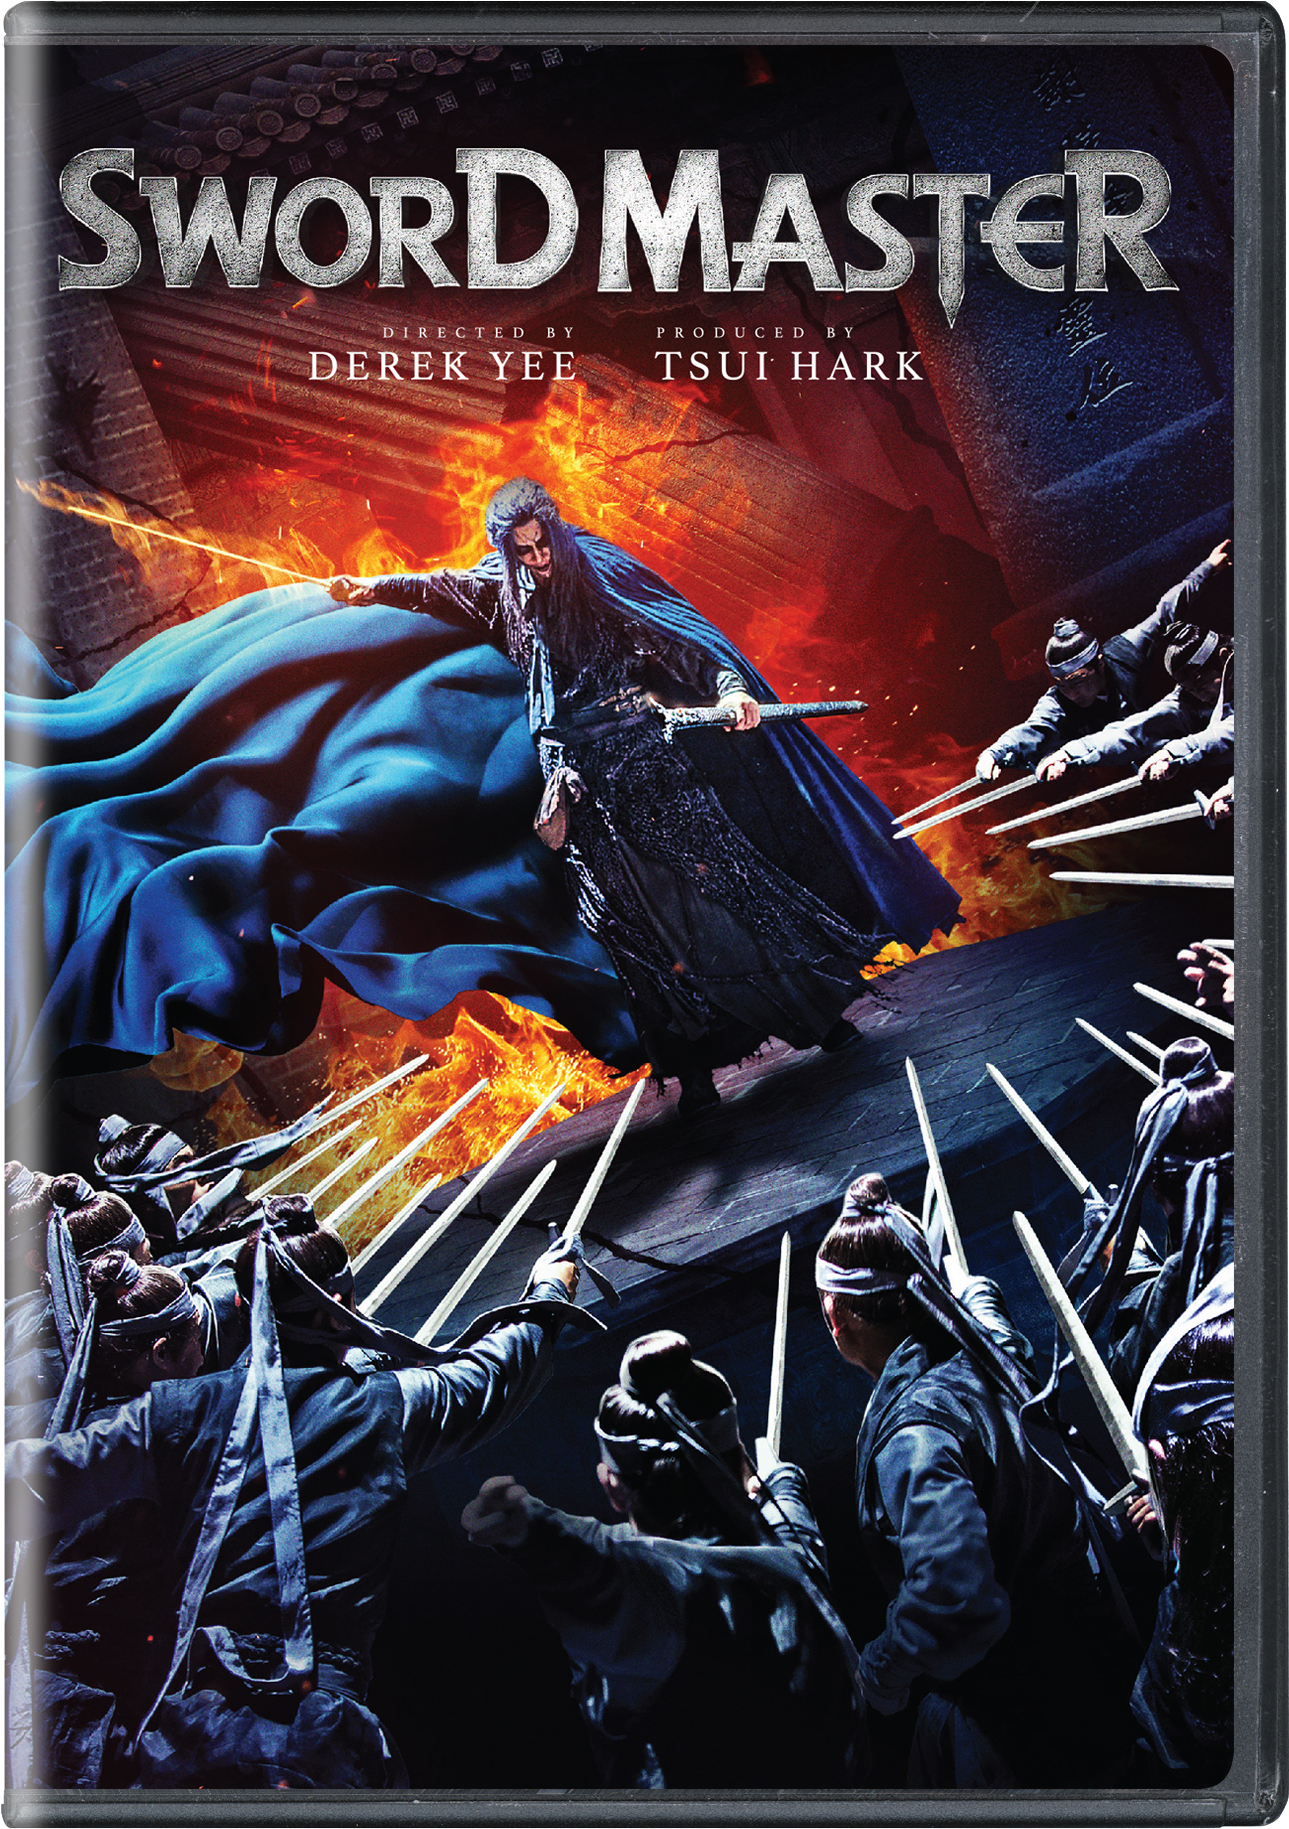 Sword Master - DVD [ 2016 ]  - Foreign Movies On DVD - Movies On GRUV